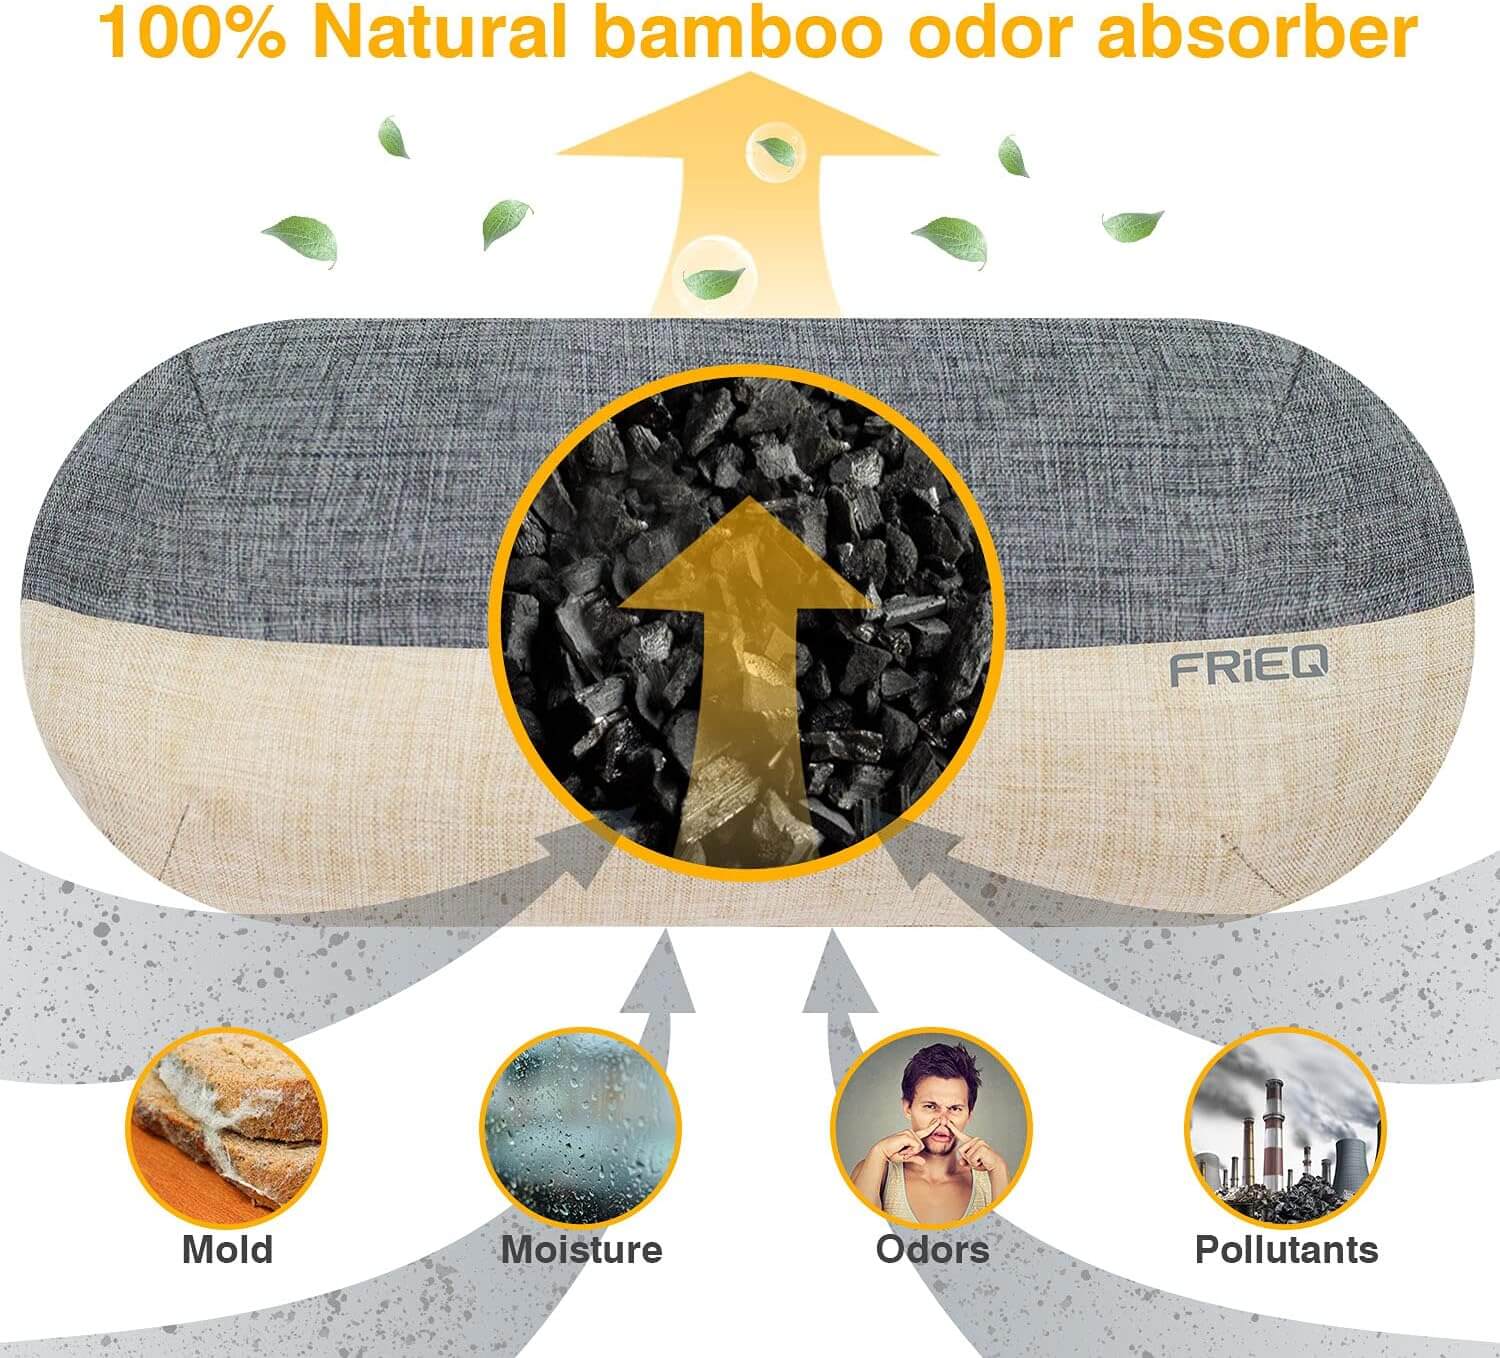 FRiEQ Car Air Freshener, 100% Activated Bamboo Charcoal Air Purifying Bag | Lasts 365+ Days | Fragrance-Free Deodorizer - Absorb Smoke Smell and Bad Odors - 100% Natural Bamboo Odor Absorber